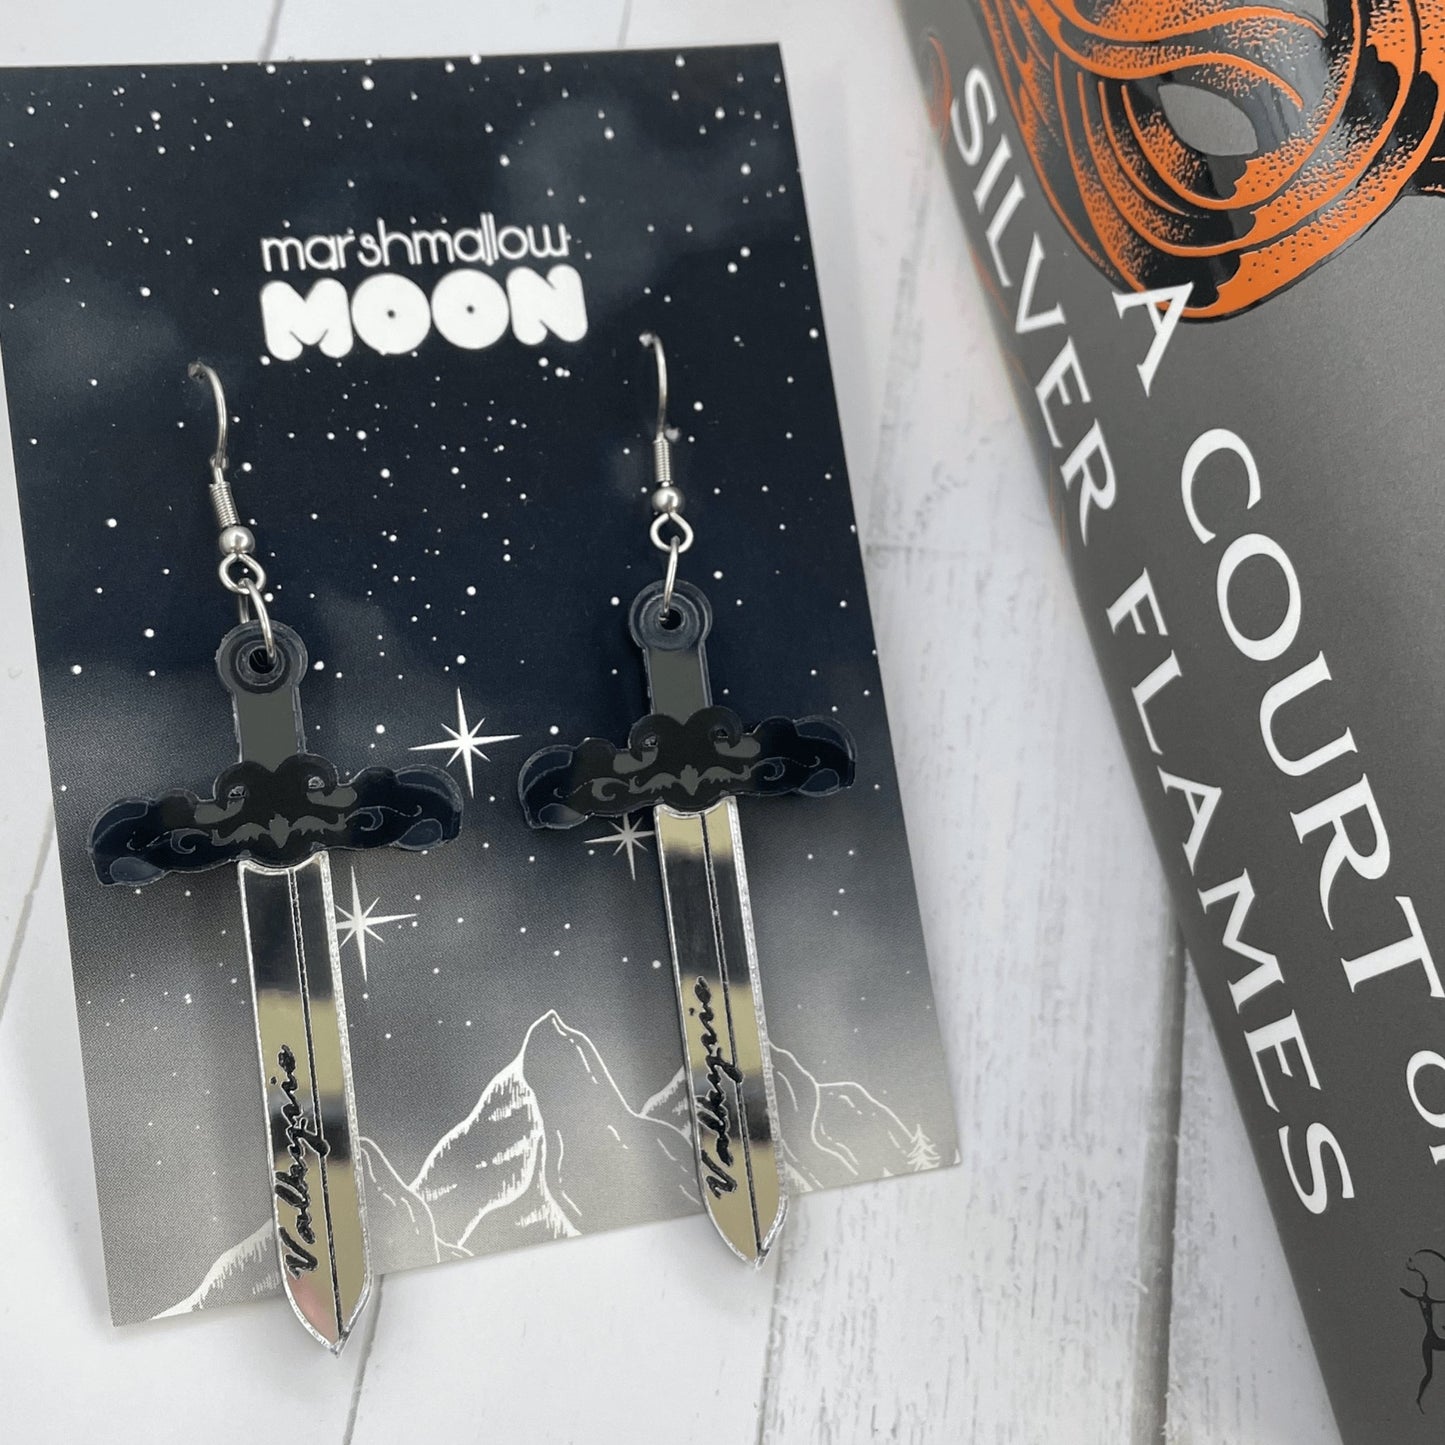 Valkyrie Sword Acrylic Earrings - Lost Minds Clothing